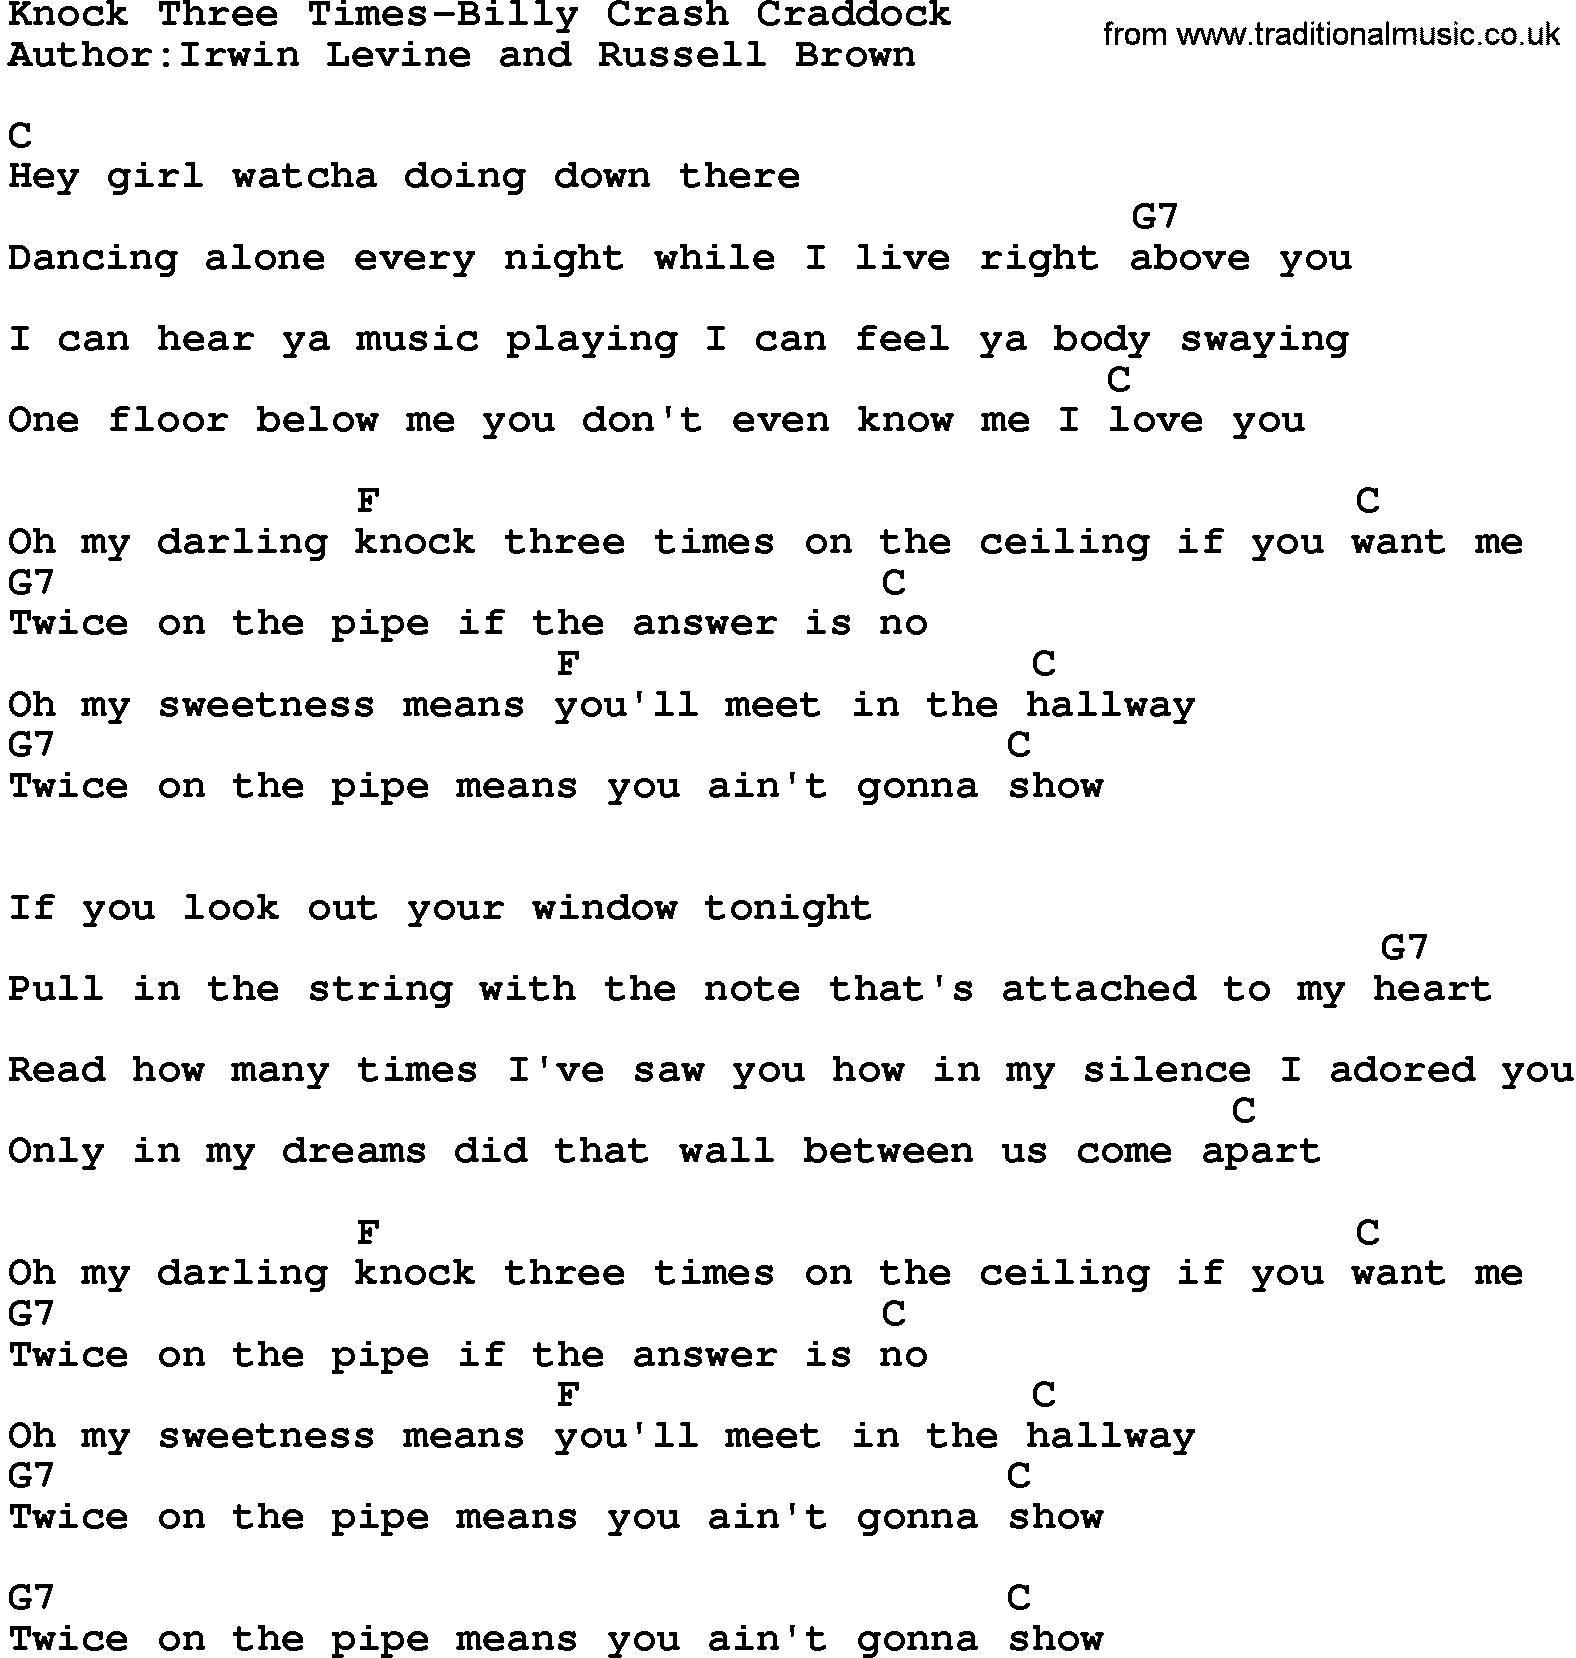 Country music song: Knock Three Times-Billy Crash Craddock lyrics and chords